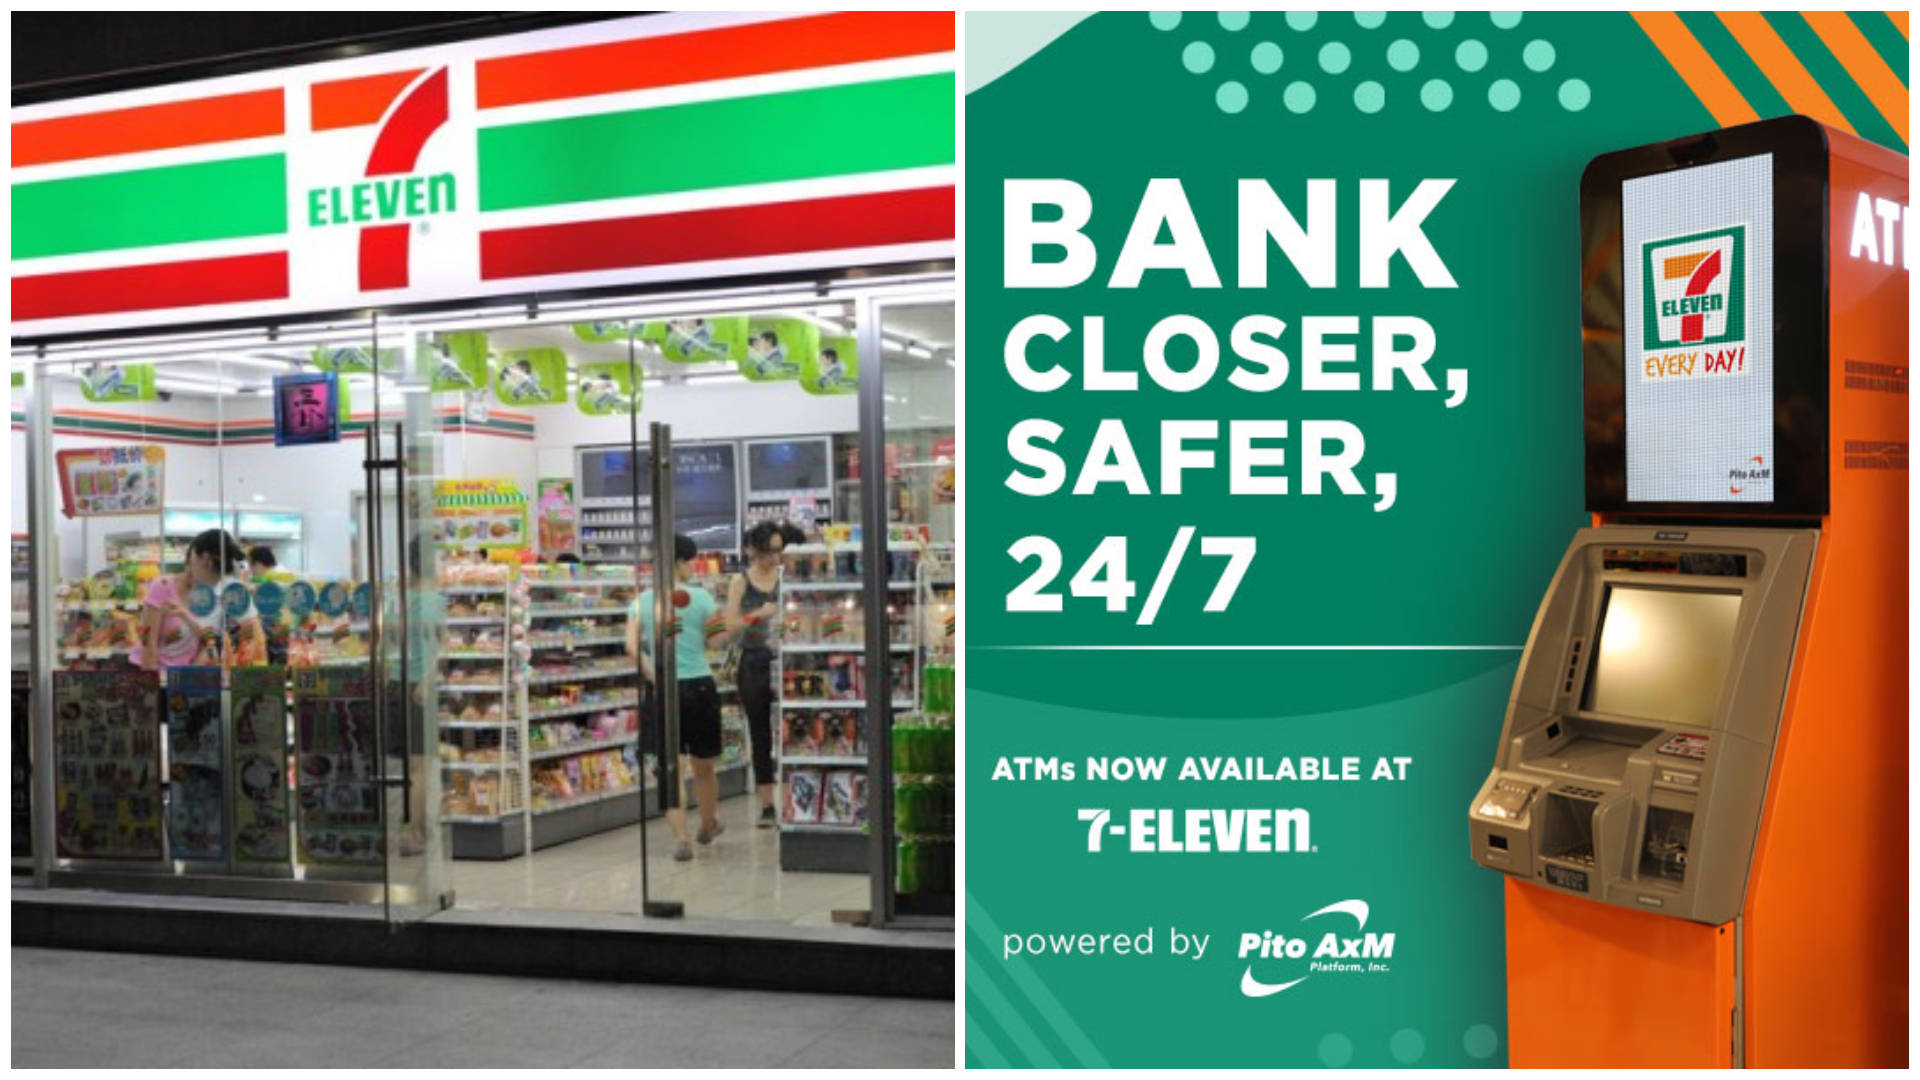 7 Eleven Bank Counter Background